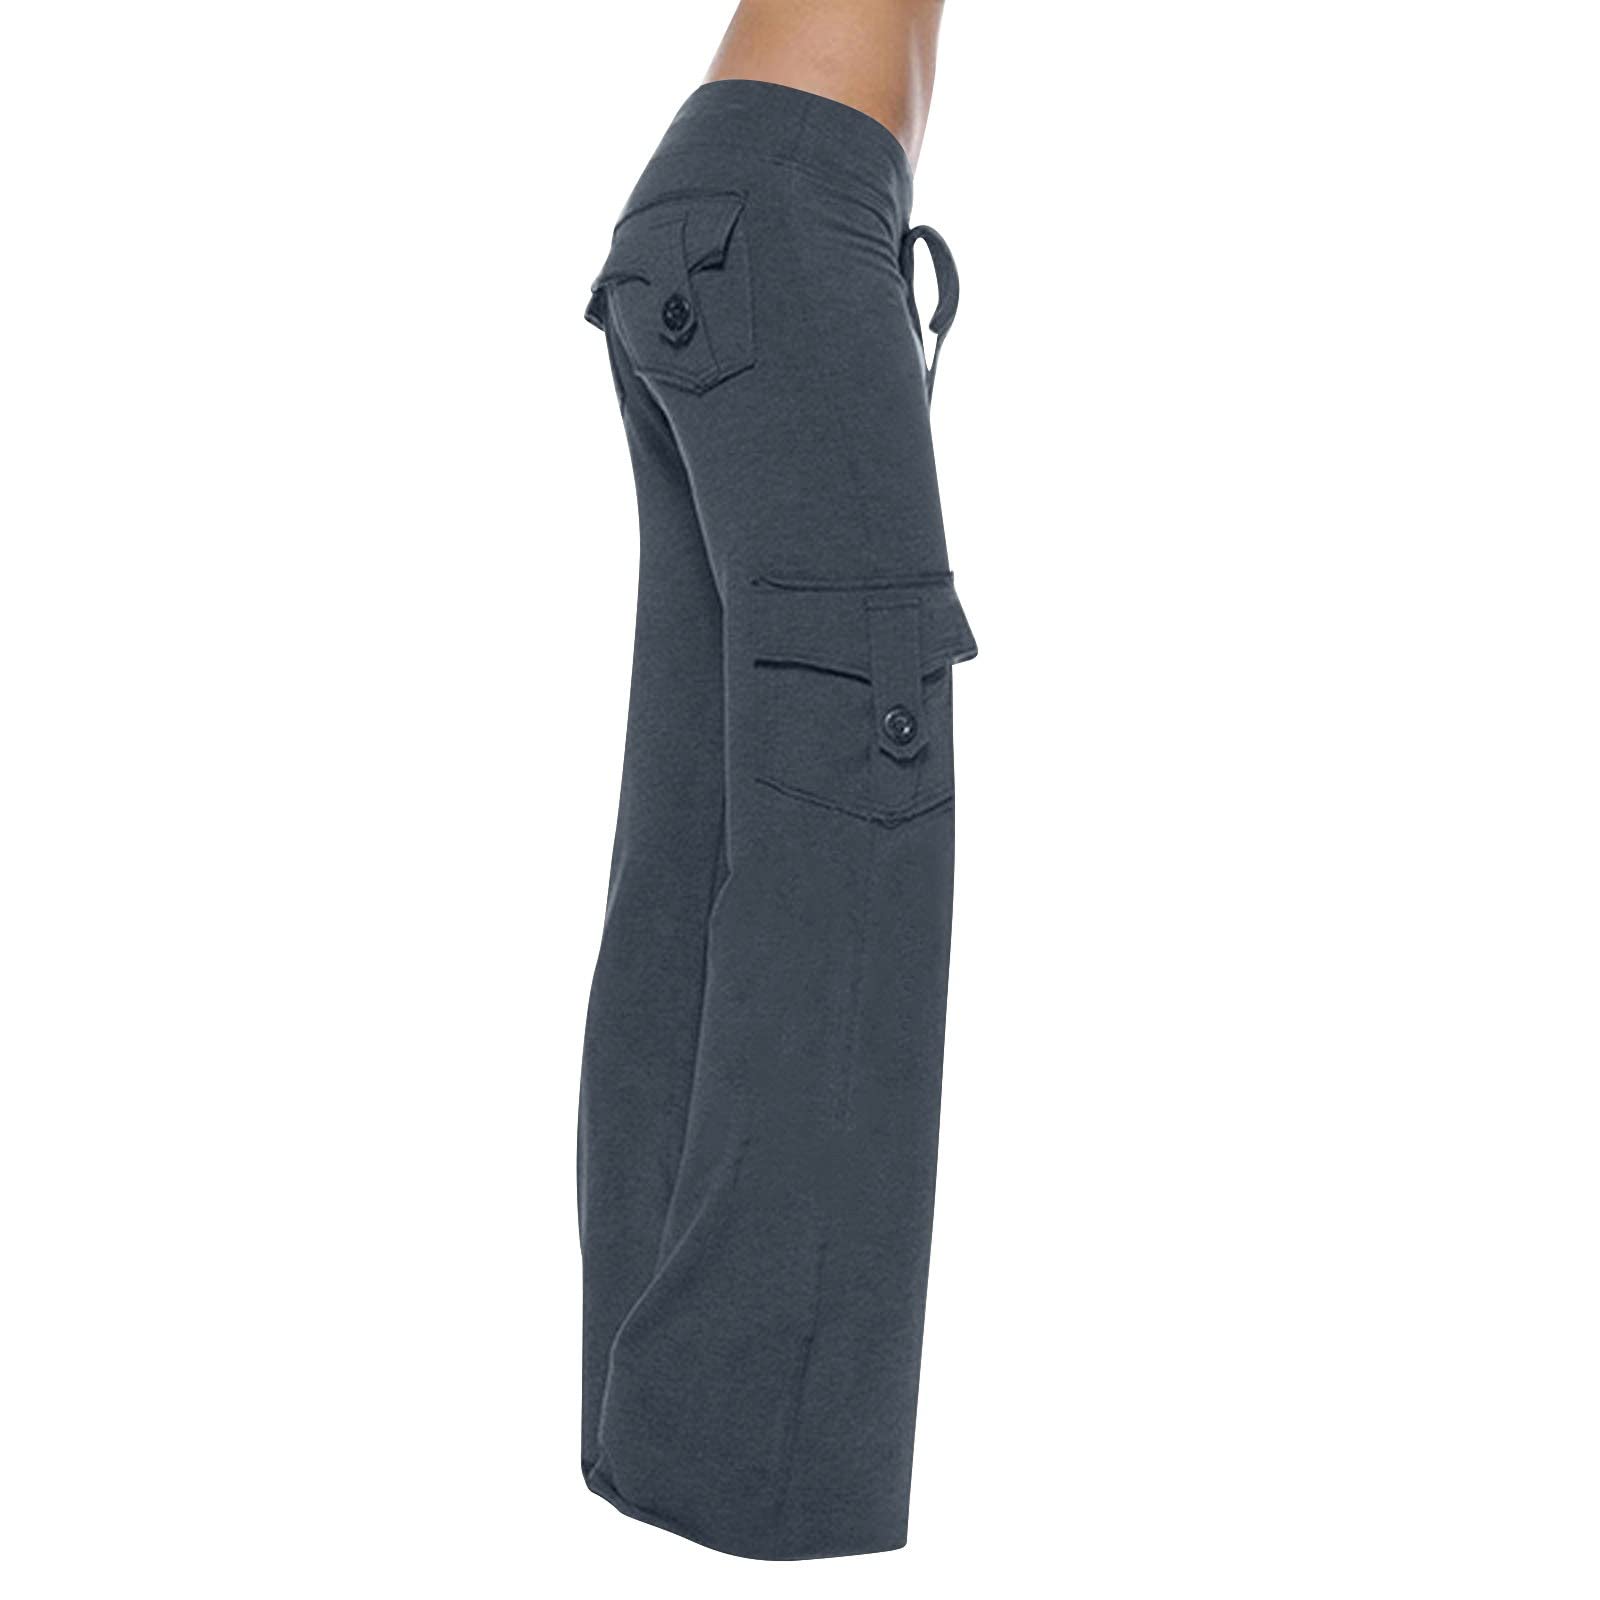  Women's New Pants Y2K Baggy Lounge Pants with Pockets